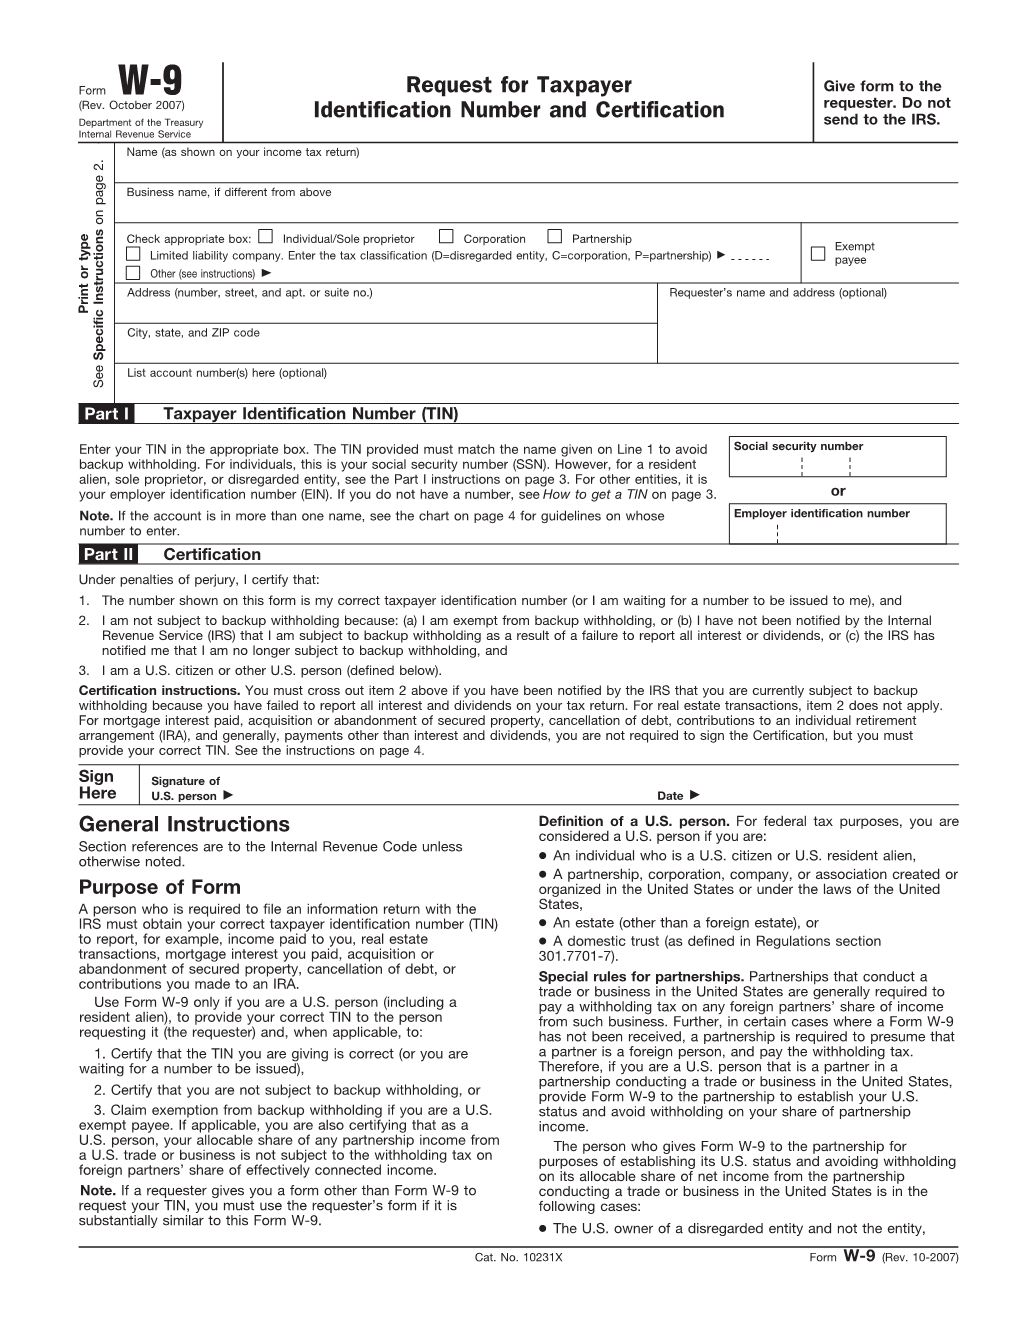 Request For Taxpayer Identification And Certification Irs Form W 9 Docslib 7298